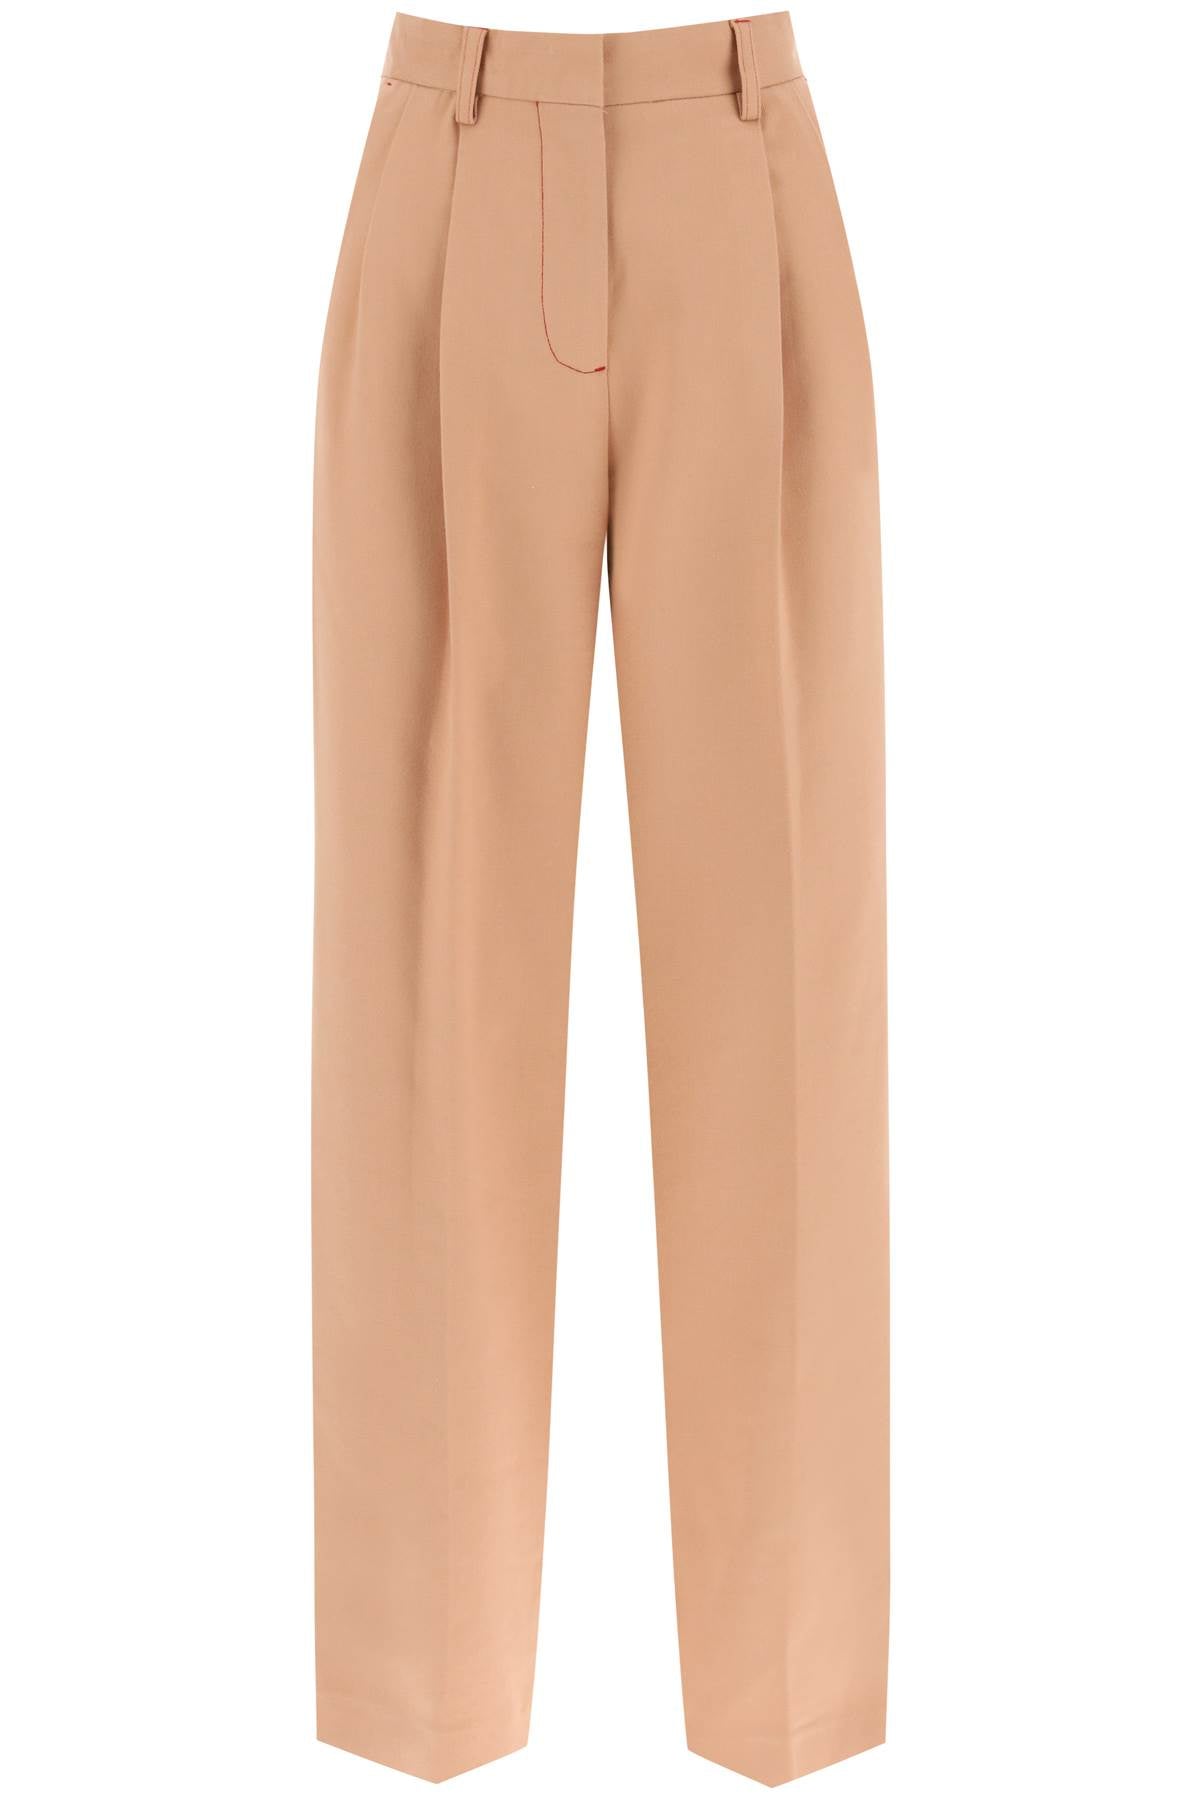 See by chloe cotton twill pants CHS23UPA04032 DUSTY CORAL